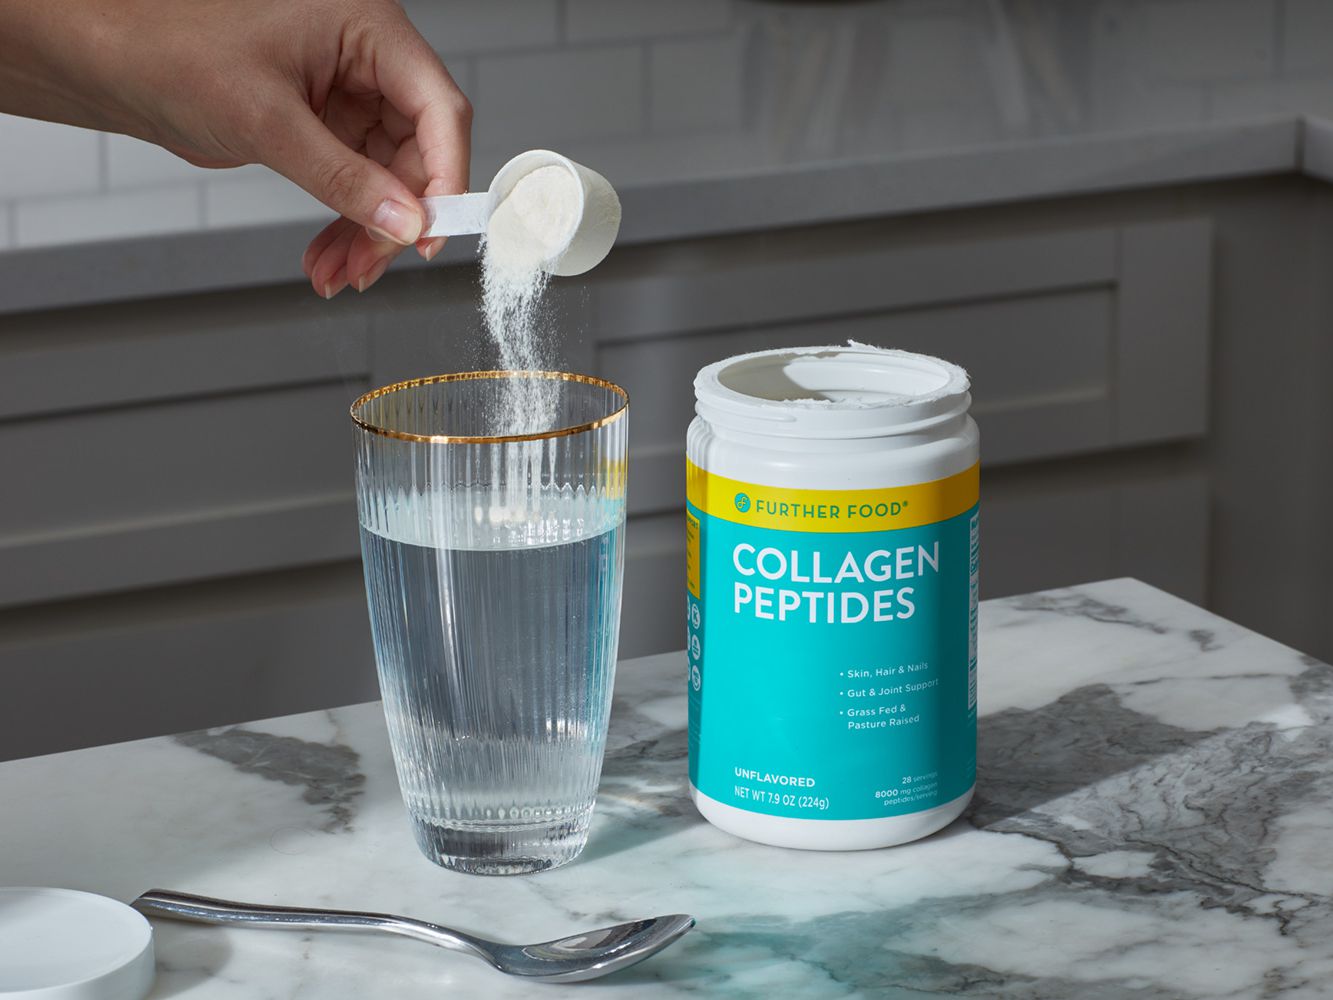 Why does taking a collagen supplement healthier?